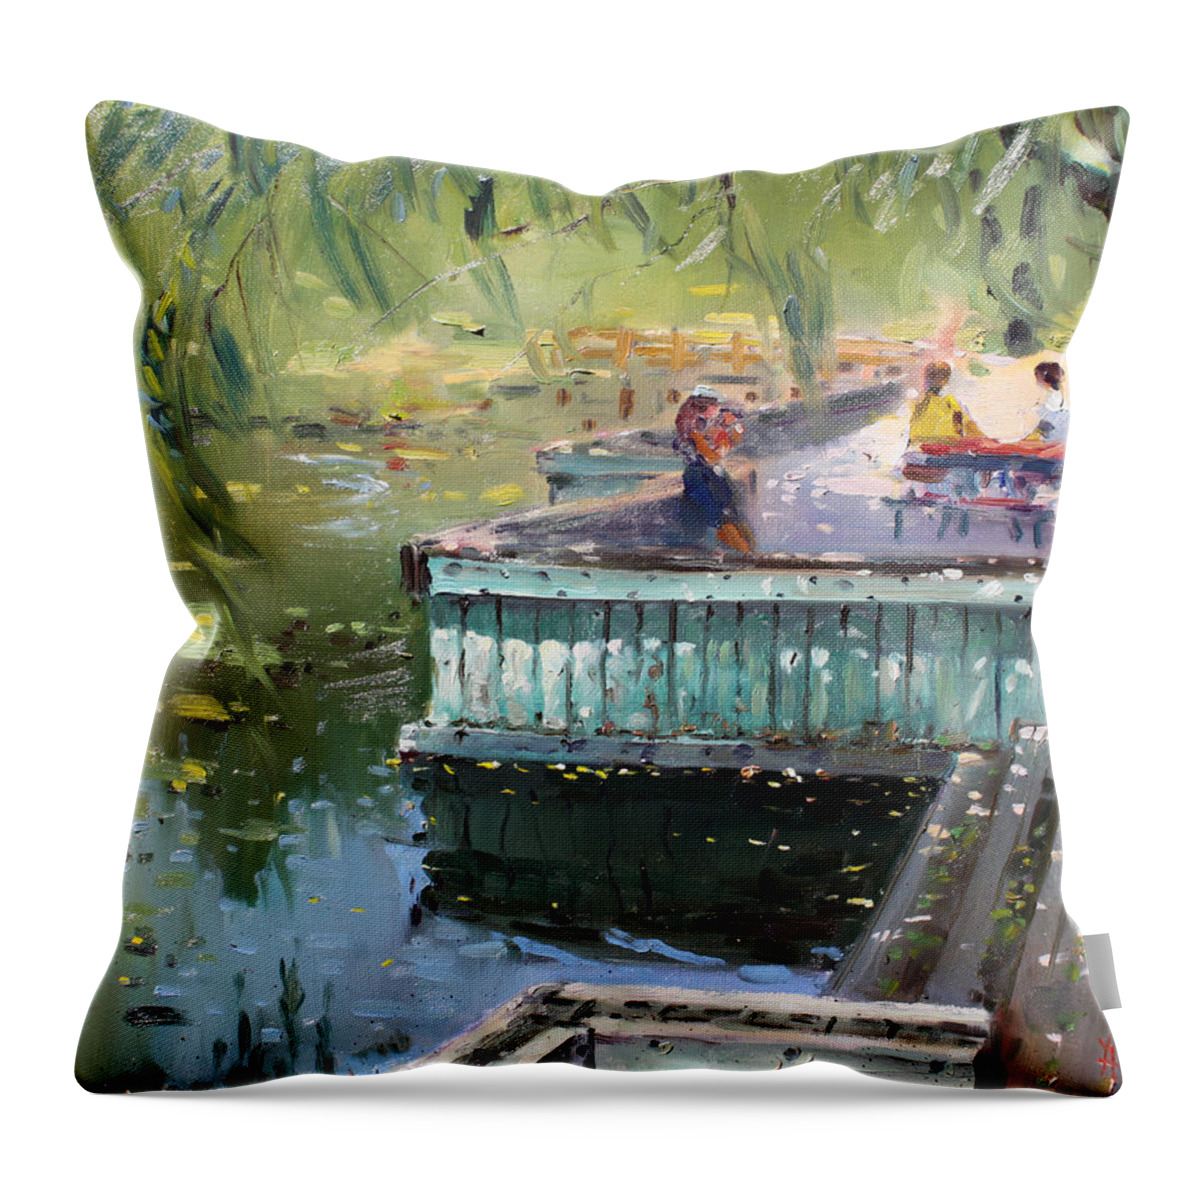 Park Throw Pillow featuring the painting At the Park by the Water by Ylli Haruni